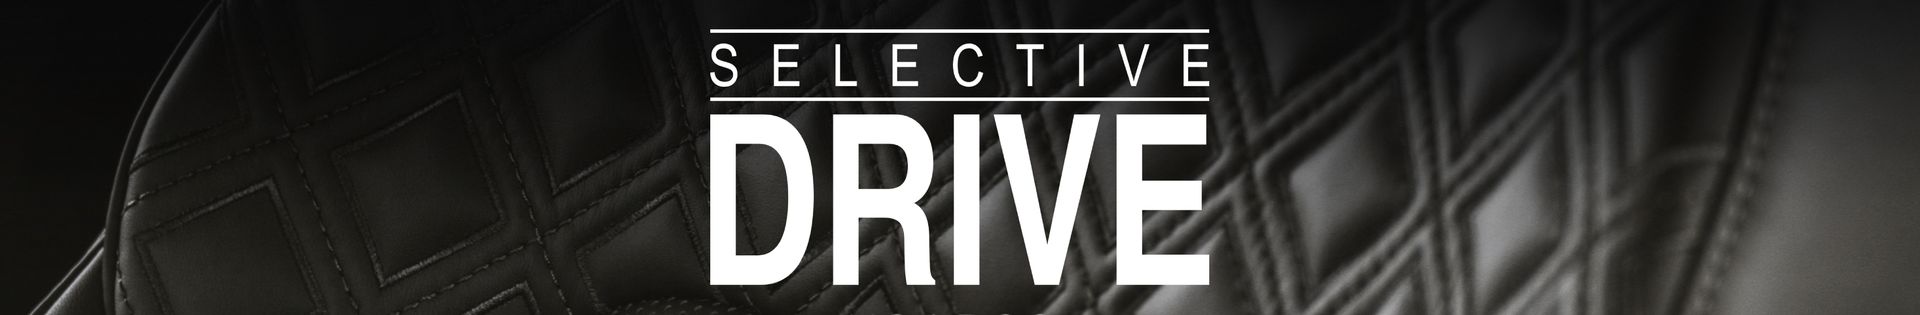 Selective Drive top banner